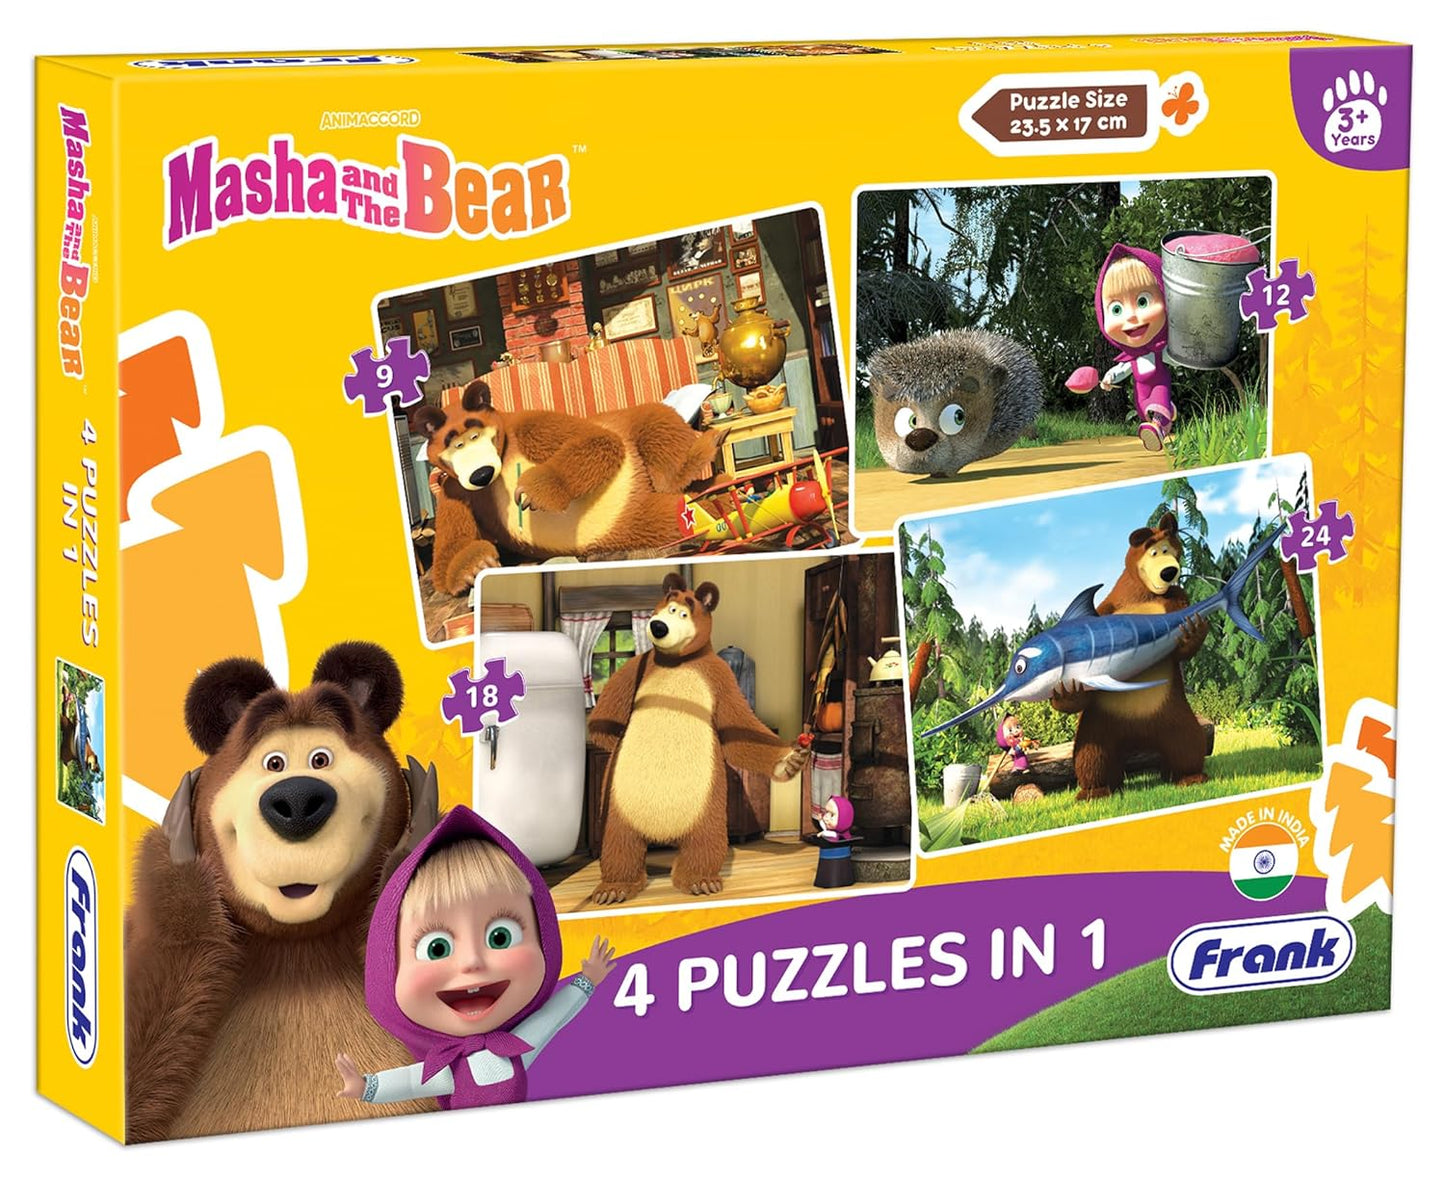 FRANK - 4 PUZZLES IN 1 (63 PIECES)